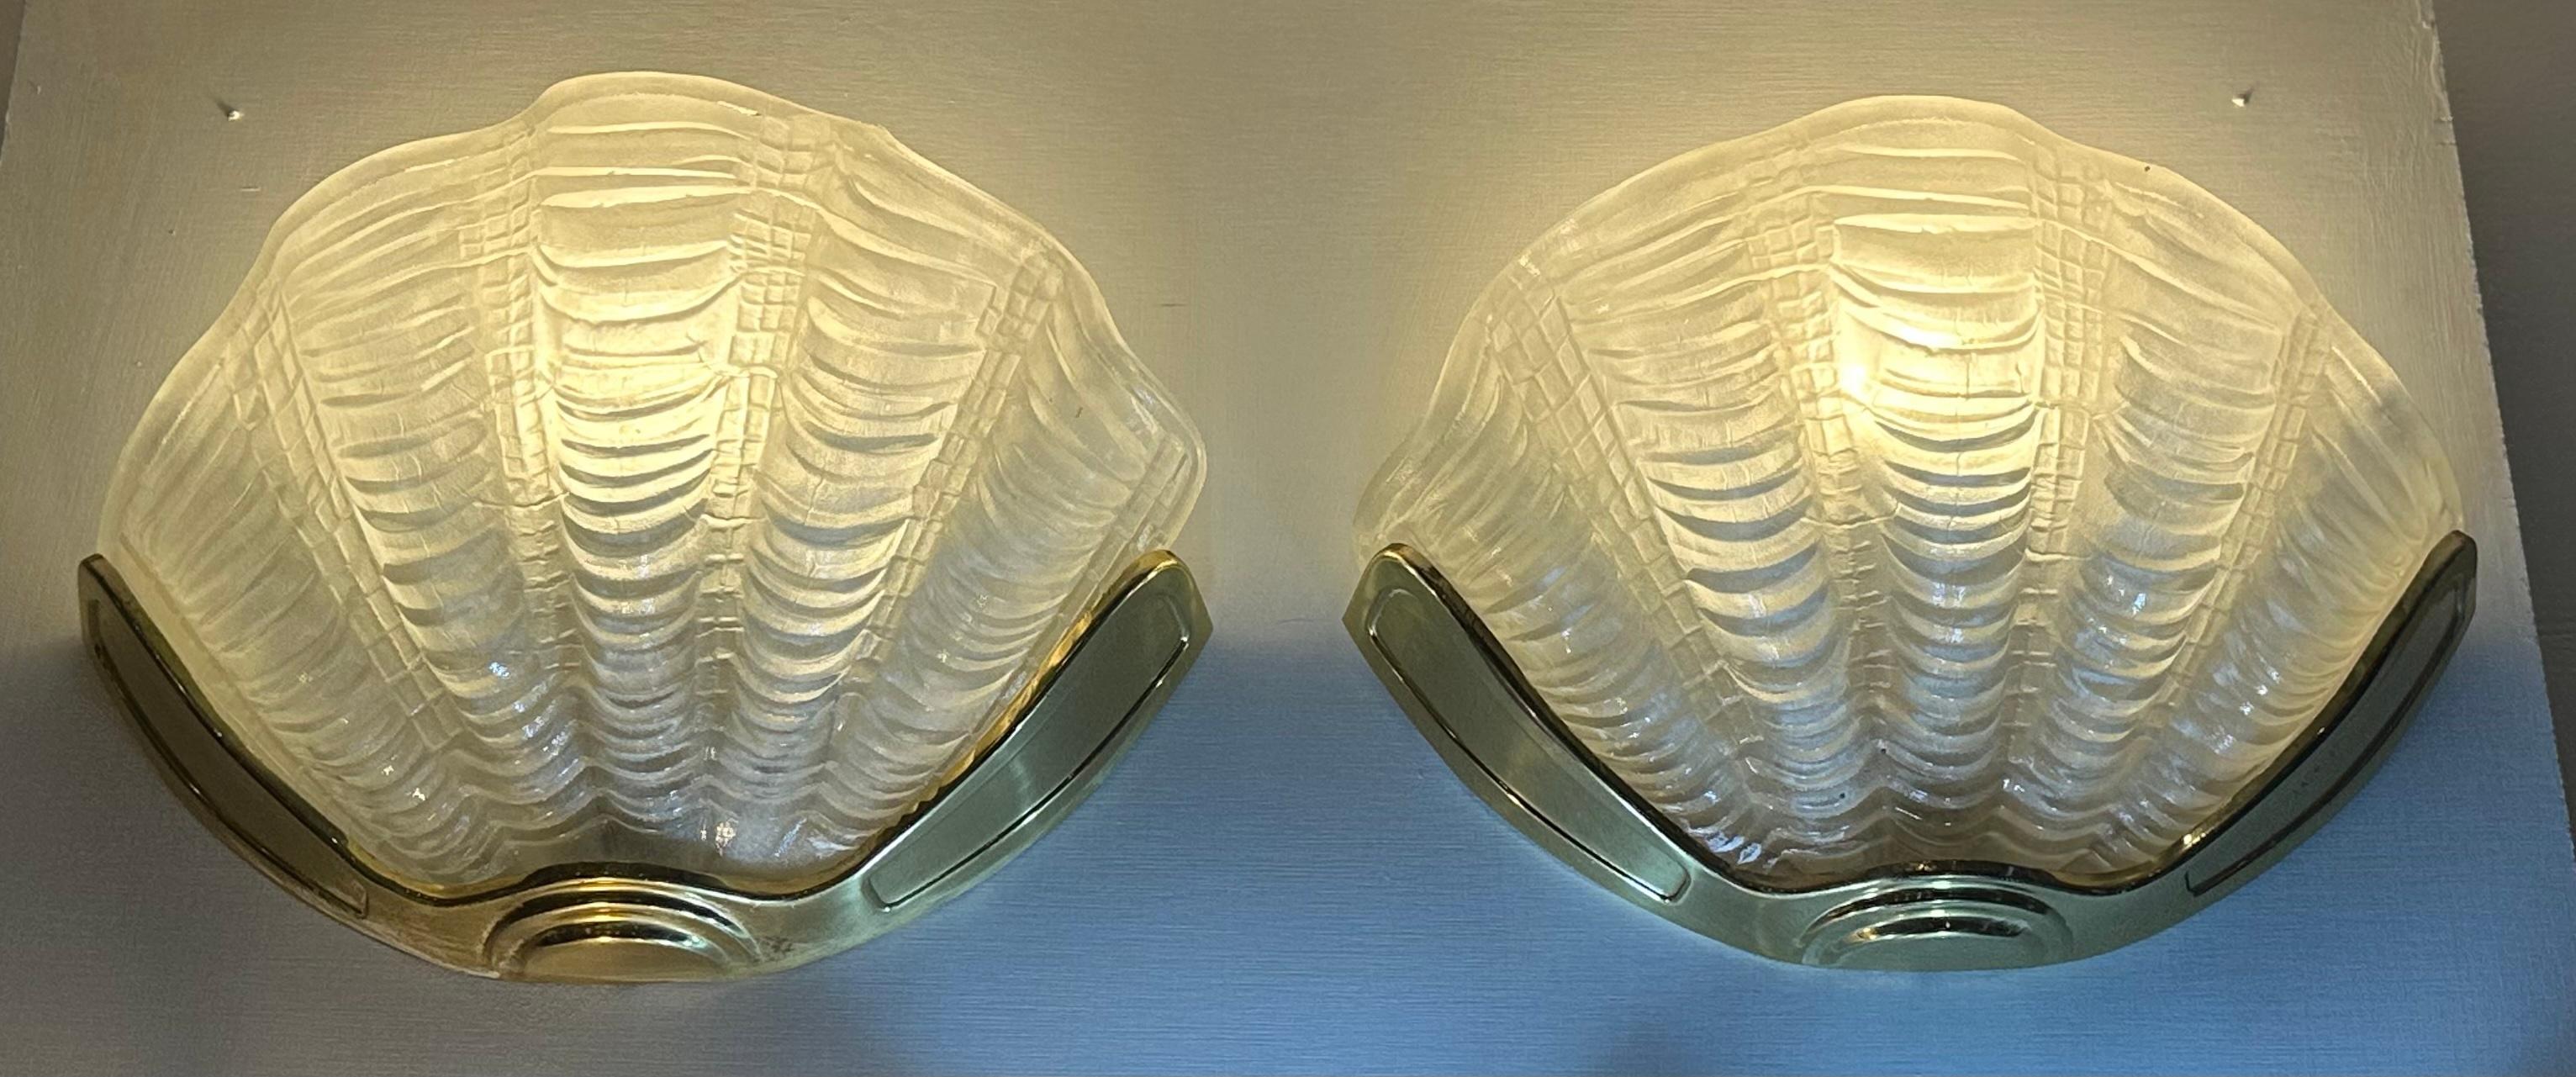 A pair of original 1920s Art Deco cinema clam shell wall lights. The white frosted rippled glass shades are mounted within a metal polished brass frame.  The shades cast a soft diffused light upwards illuminating the wall above beautifully.

The